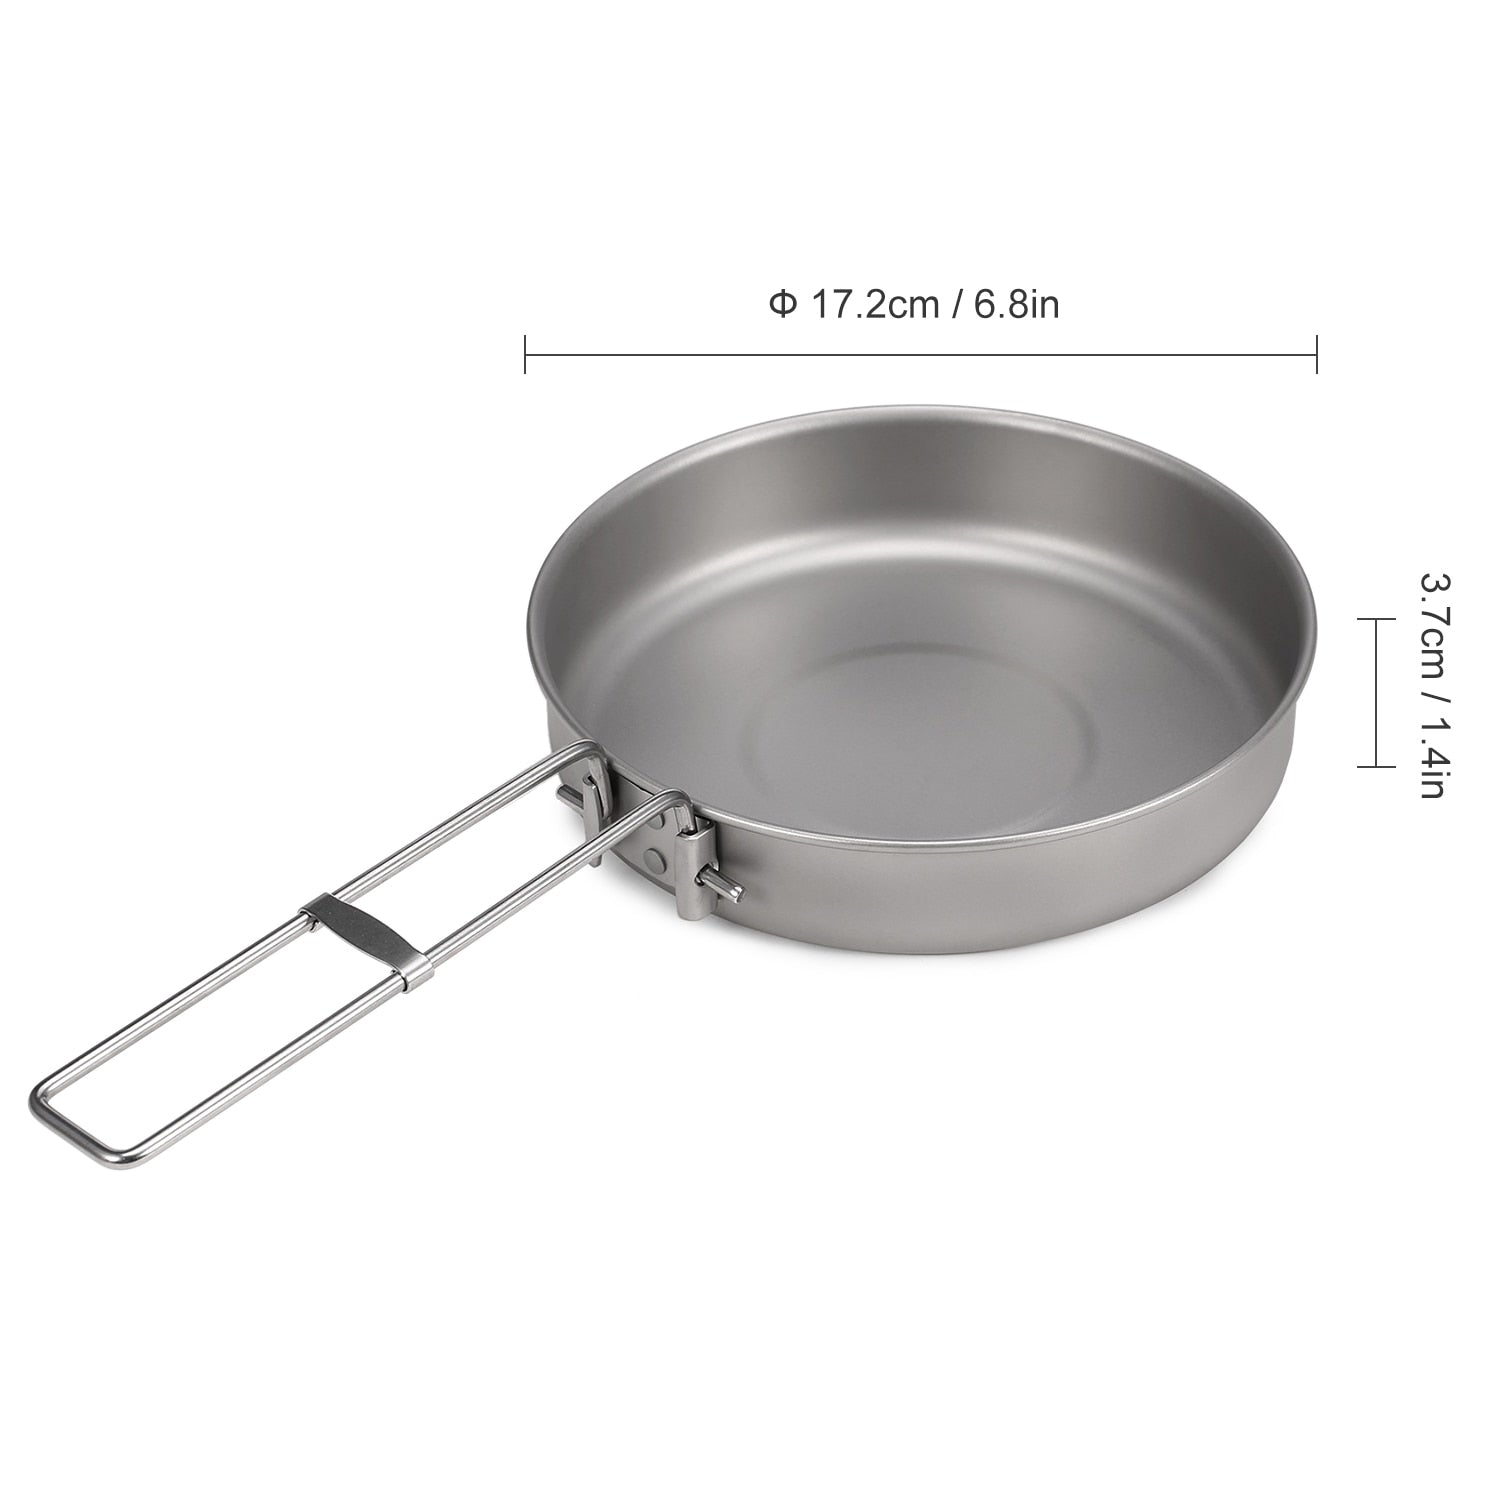 Titanium Frypan with Foldable Handle Ultralight Outdoor Camping Frying Pan